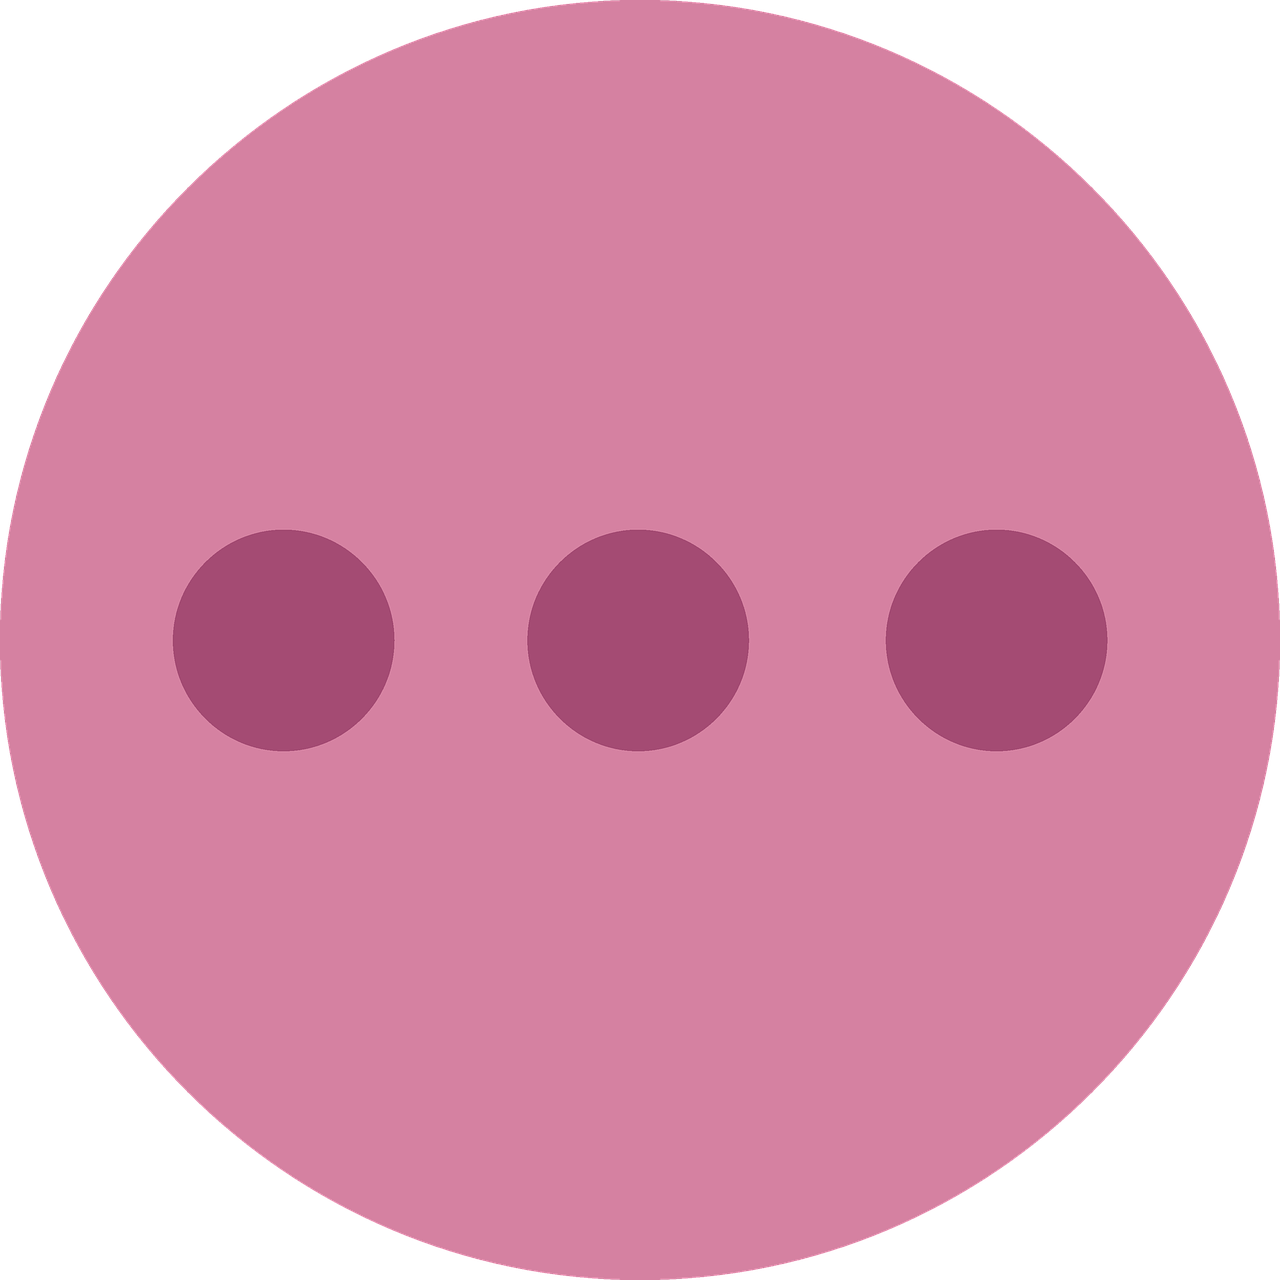 a pink circle with three dots on it, sōsaku hanga, matriarchy, pods, flat color, complete body view